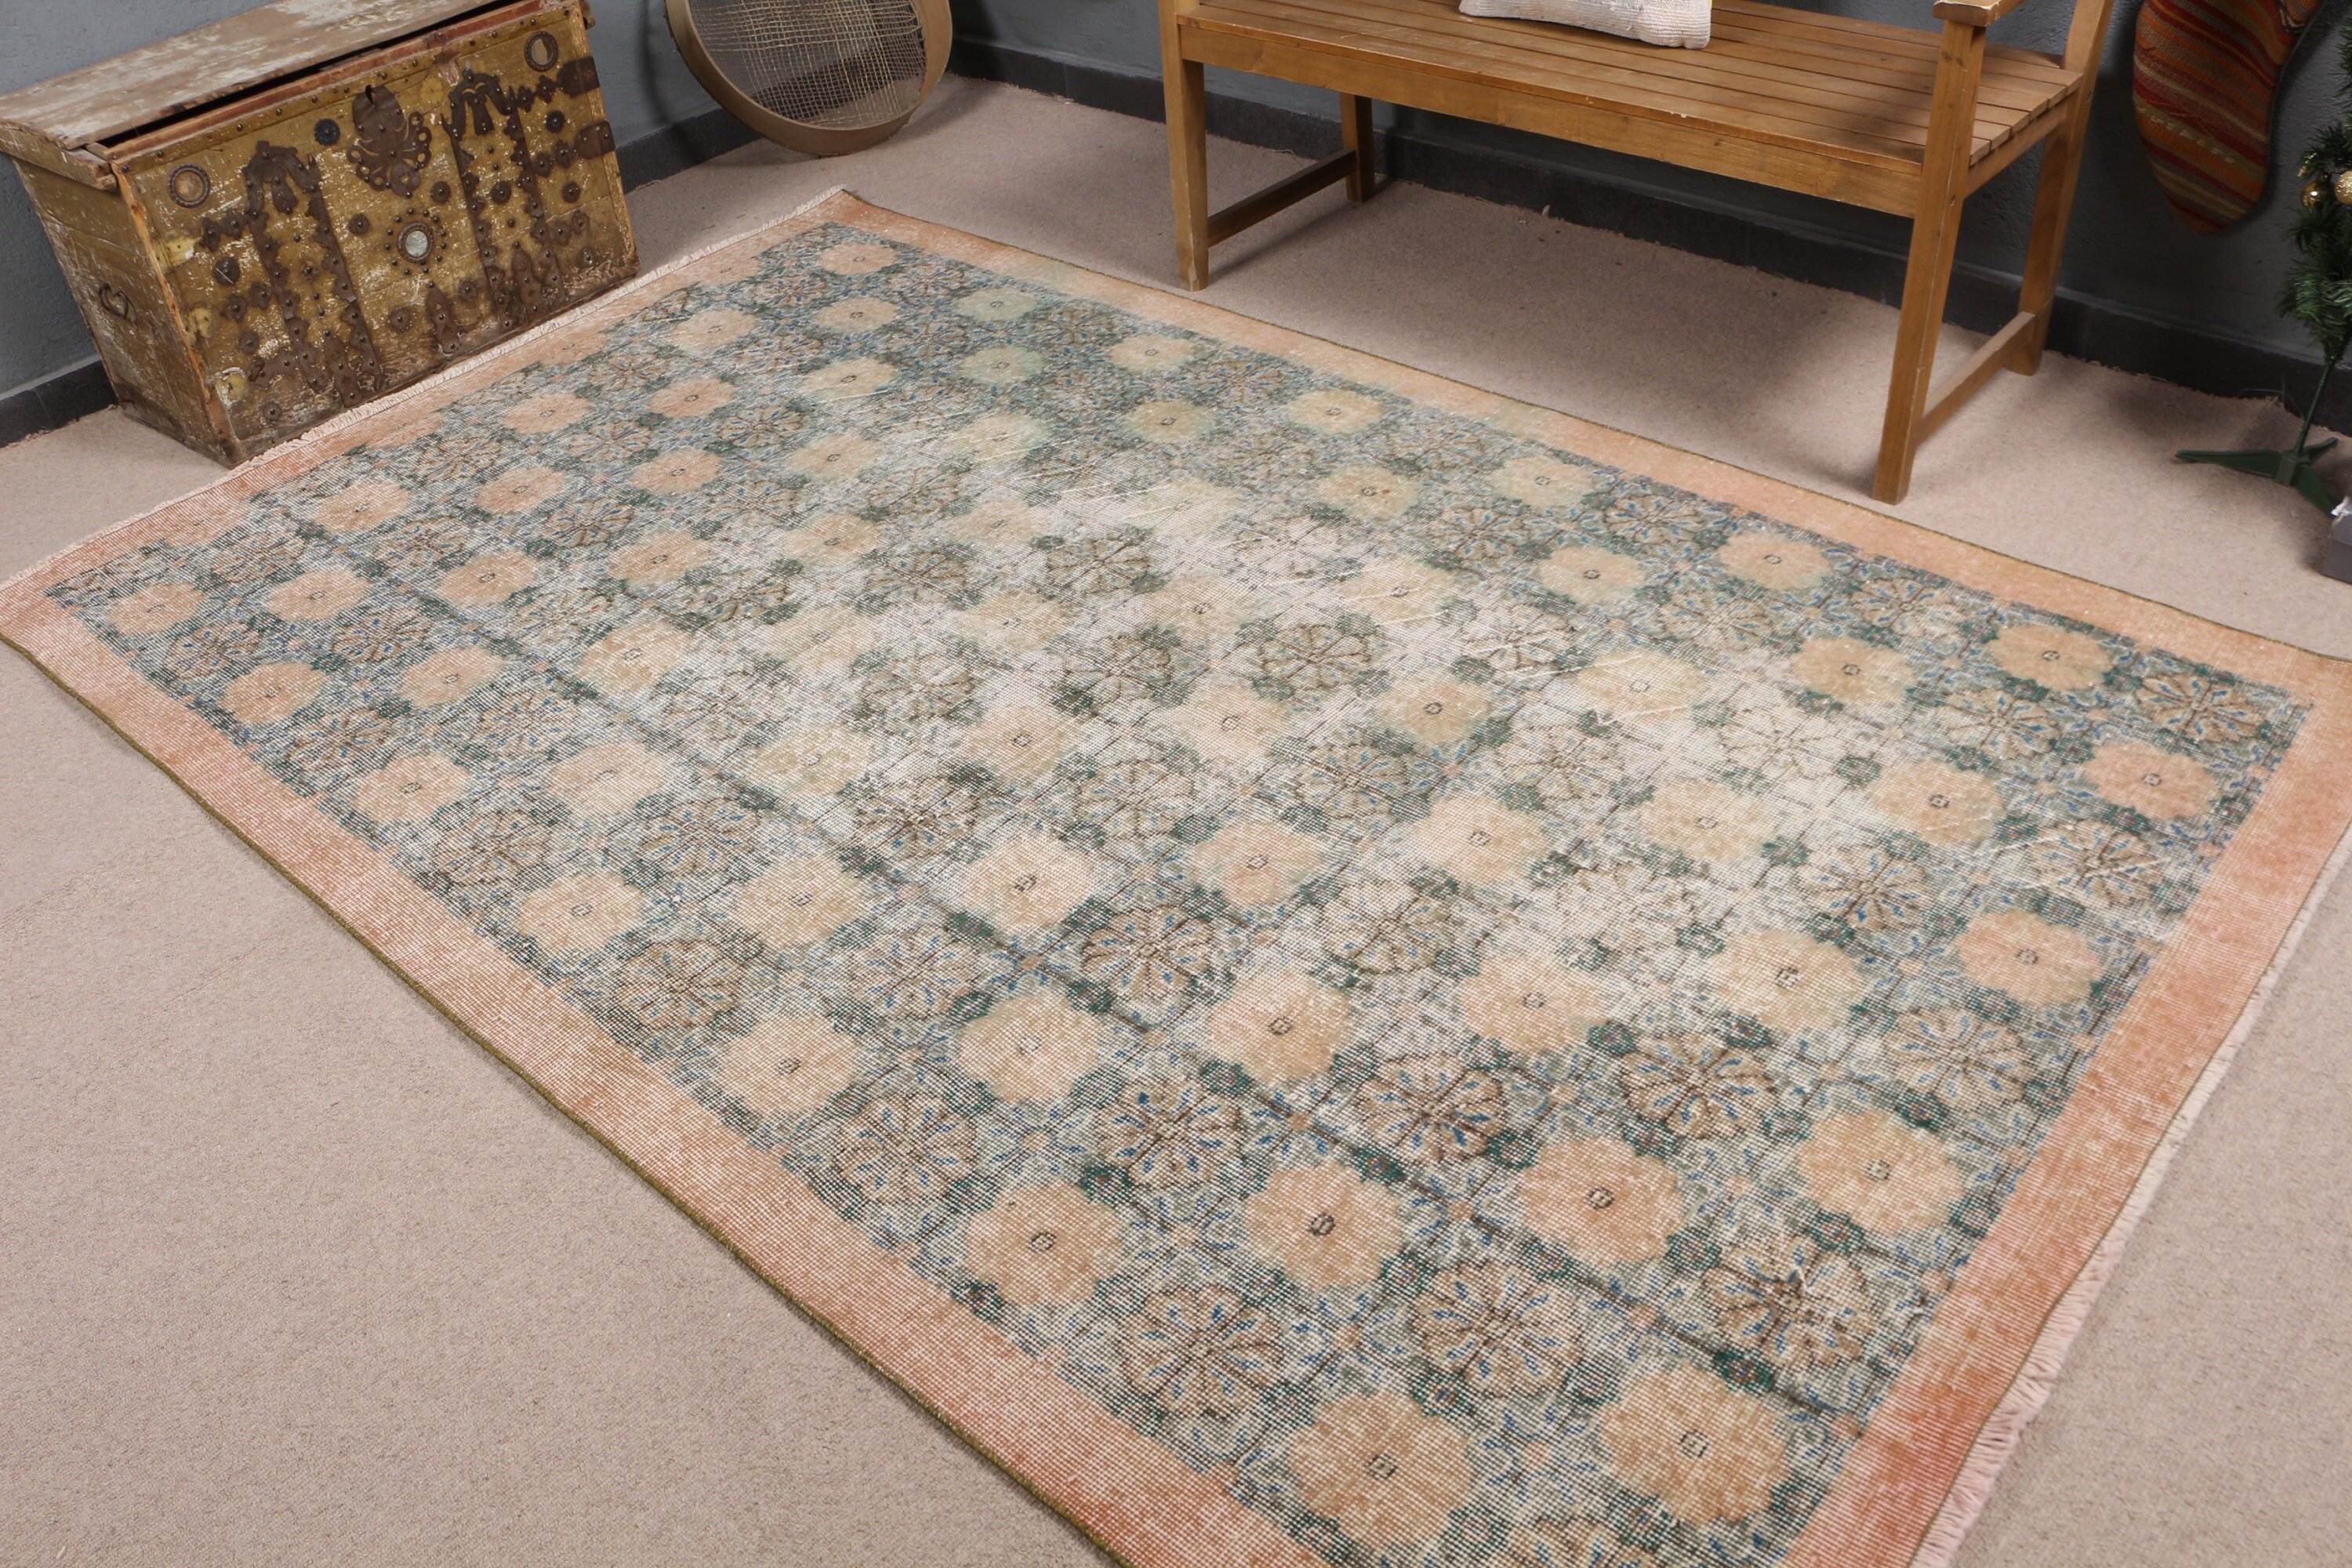 Vintage Rug, 5.4x8.8 ft Large Rugs, Cool Rugs, Turkish Rug, Green Antique Rug, Salon Rug, Living Room Rugs, Oushak Rugs, Rugs for Salon